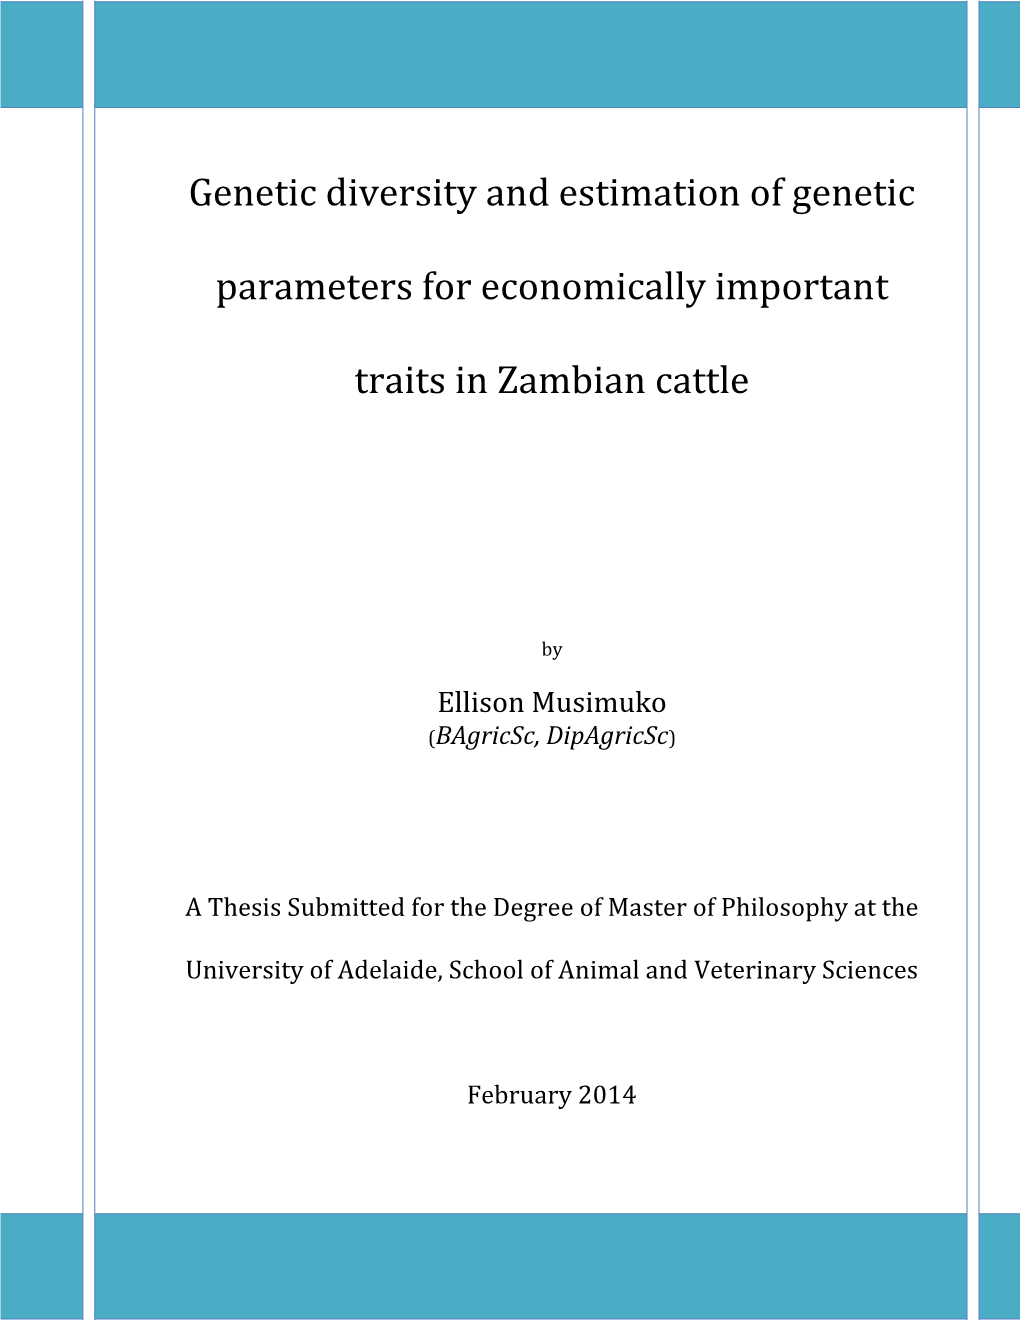 Genetic Diversity and Estimation of Genetic Parameters For